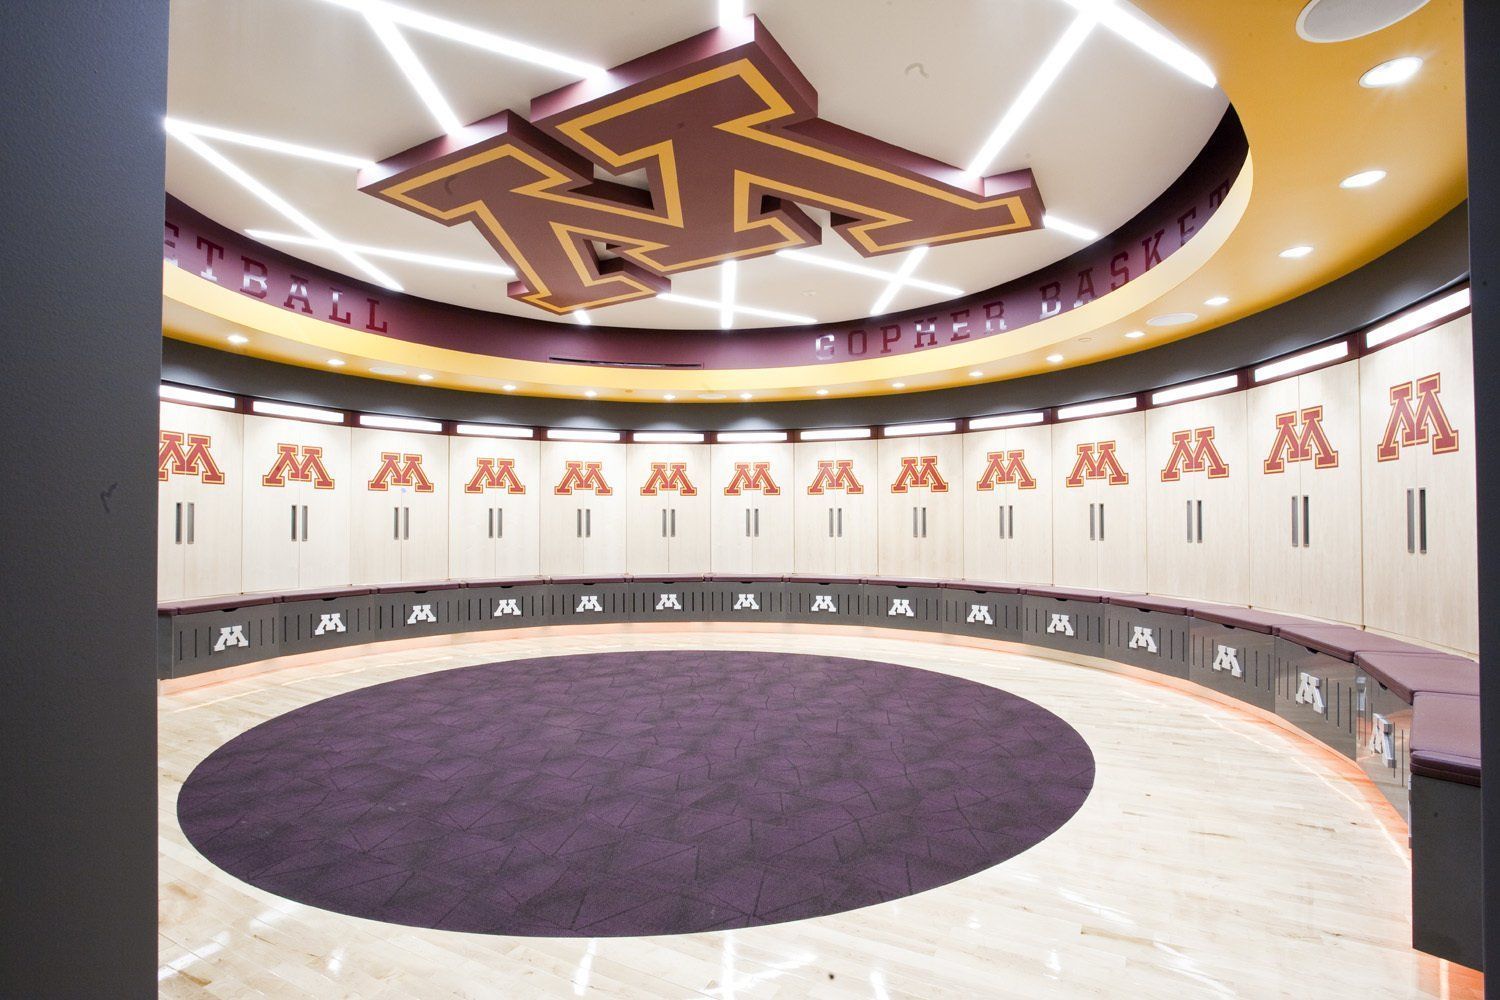 A locker room with a large t on the ceiling